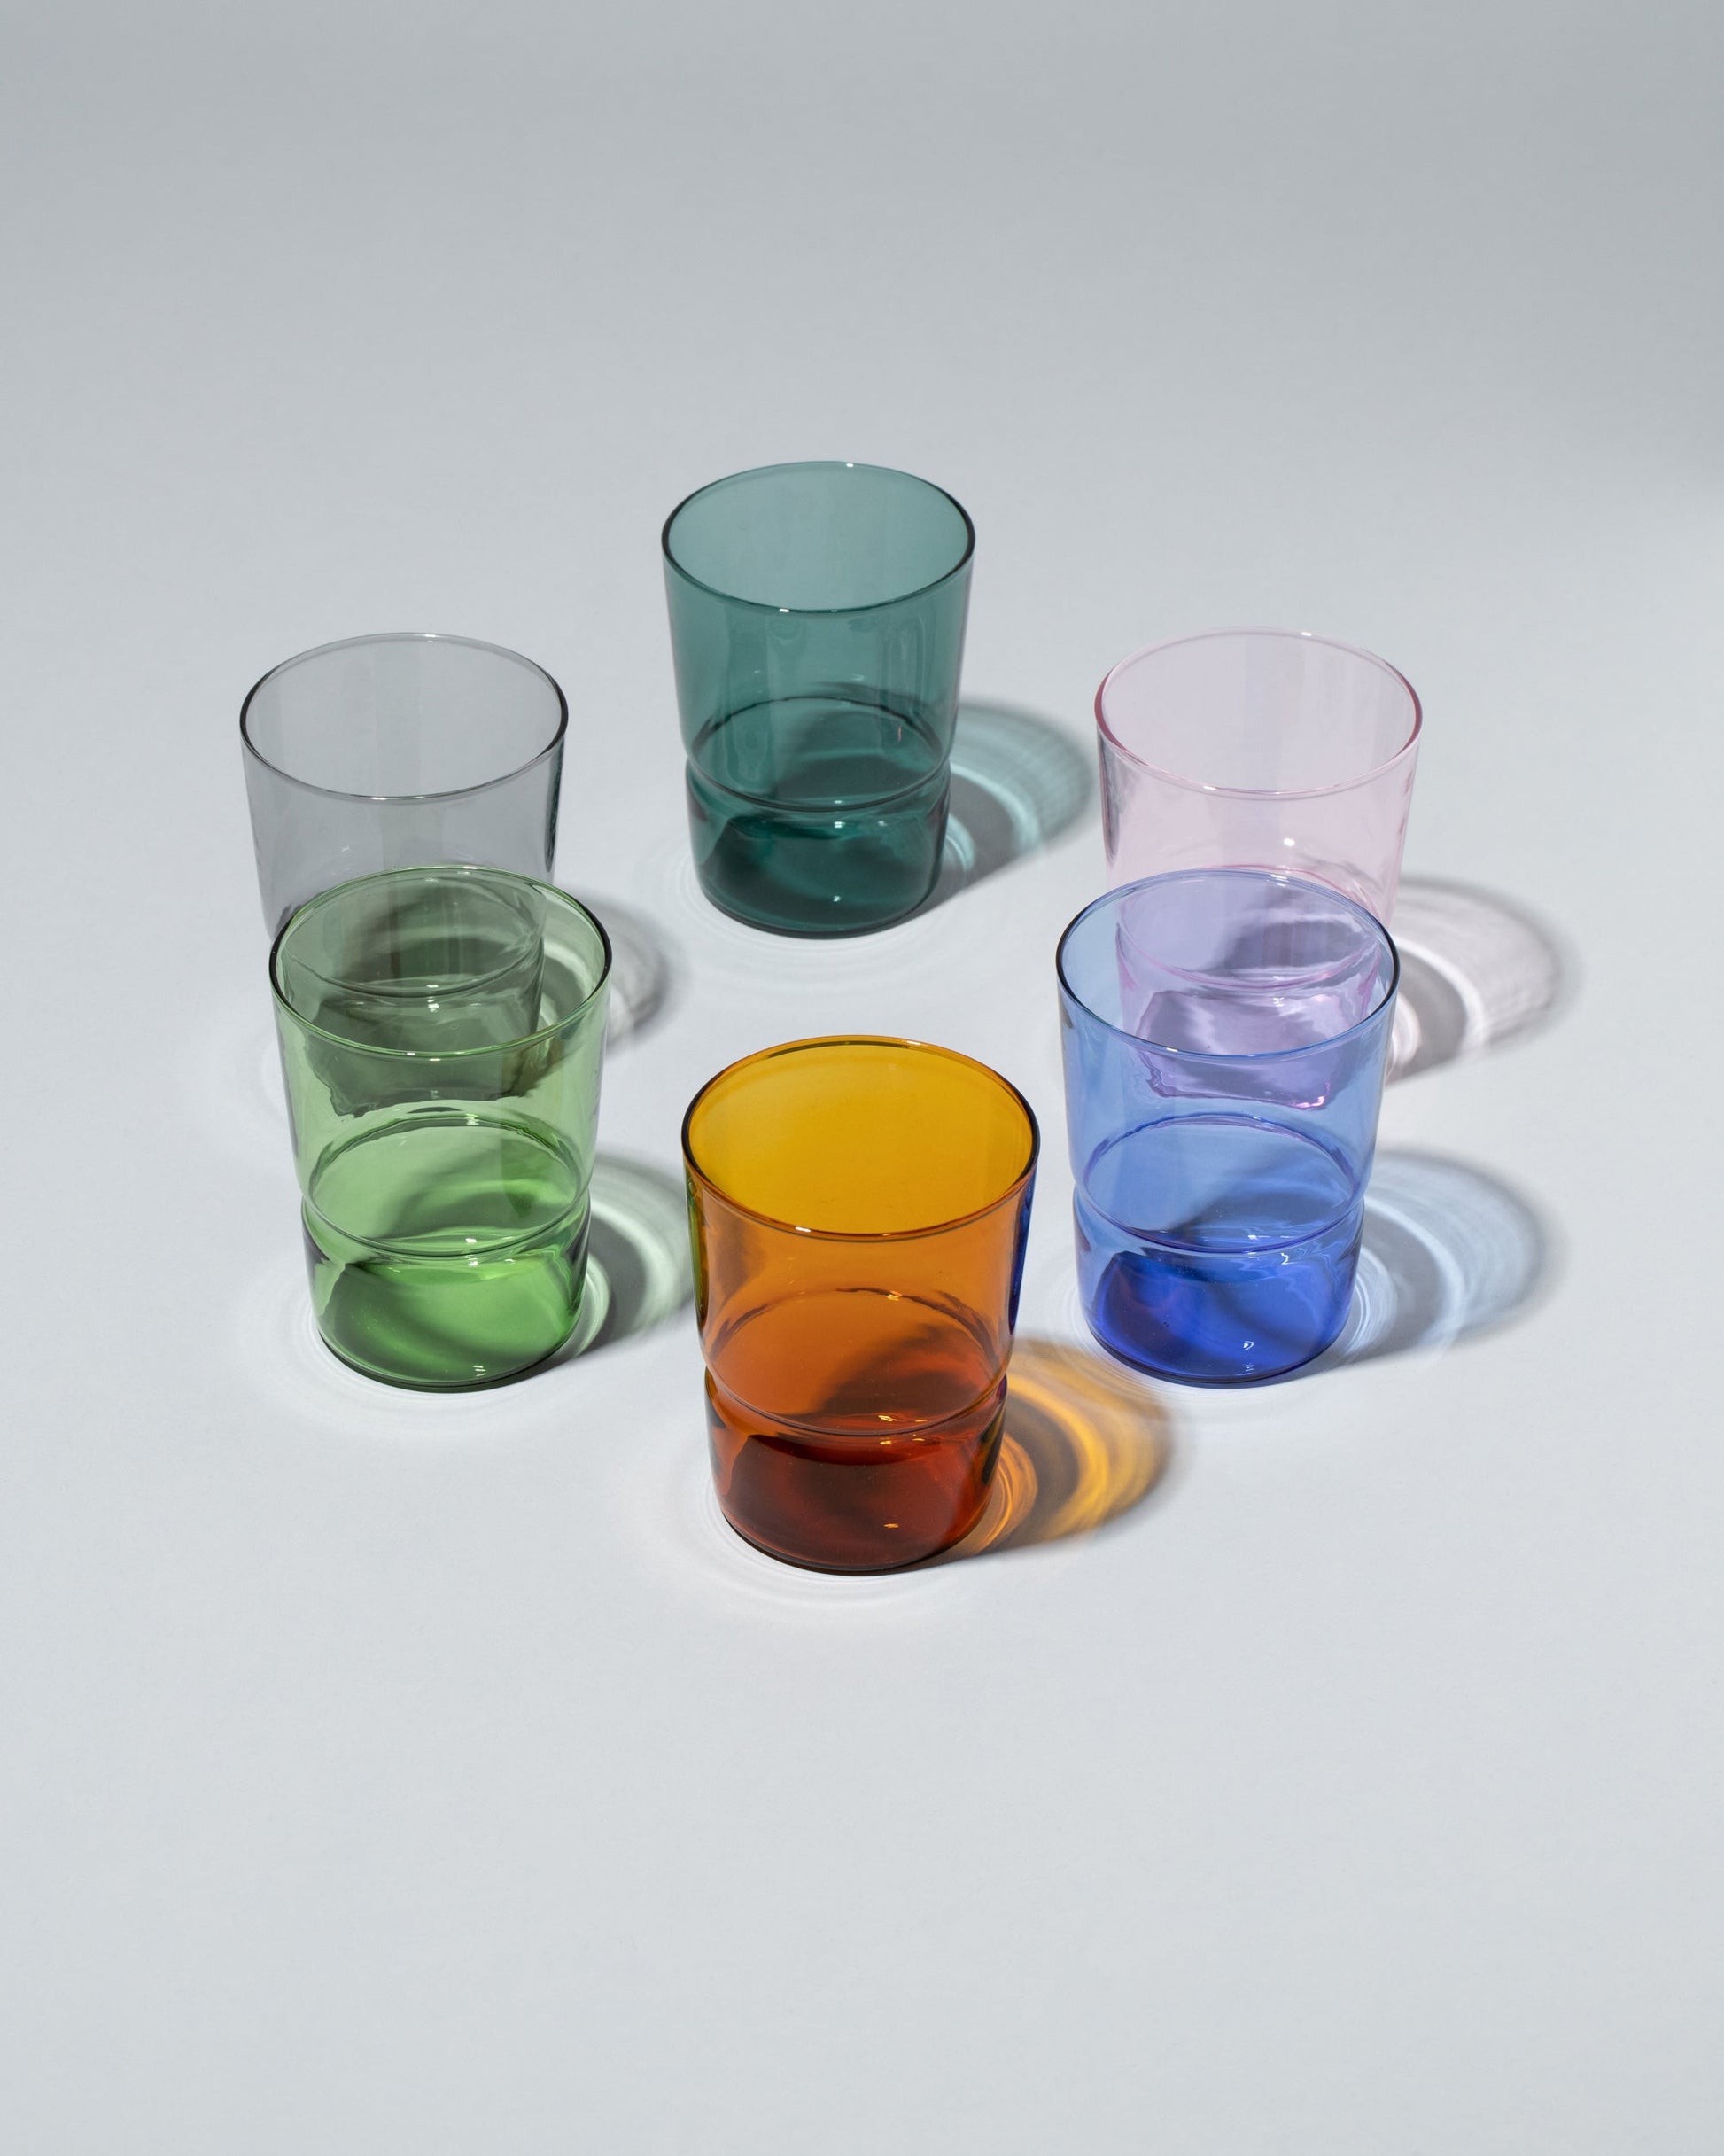 Group of Ichendorf Milano Green, Light Blue, Pink, Smoke, Teal and Amber TAP Glasses on light color background.